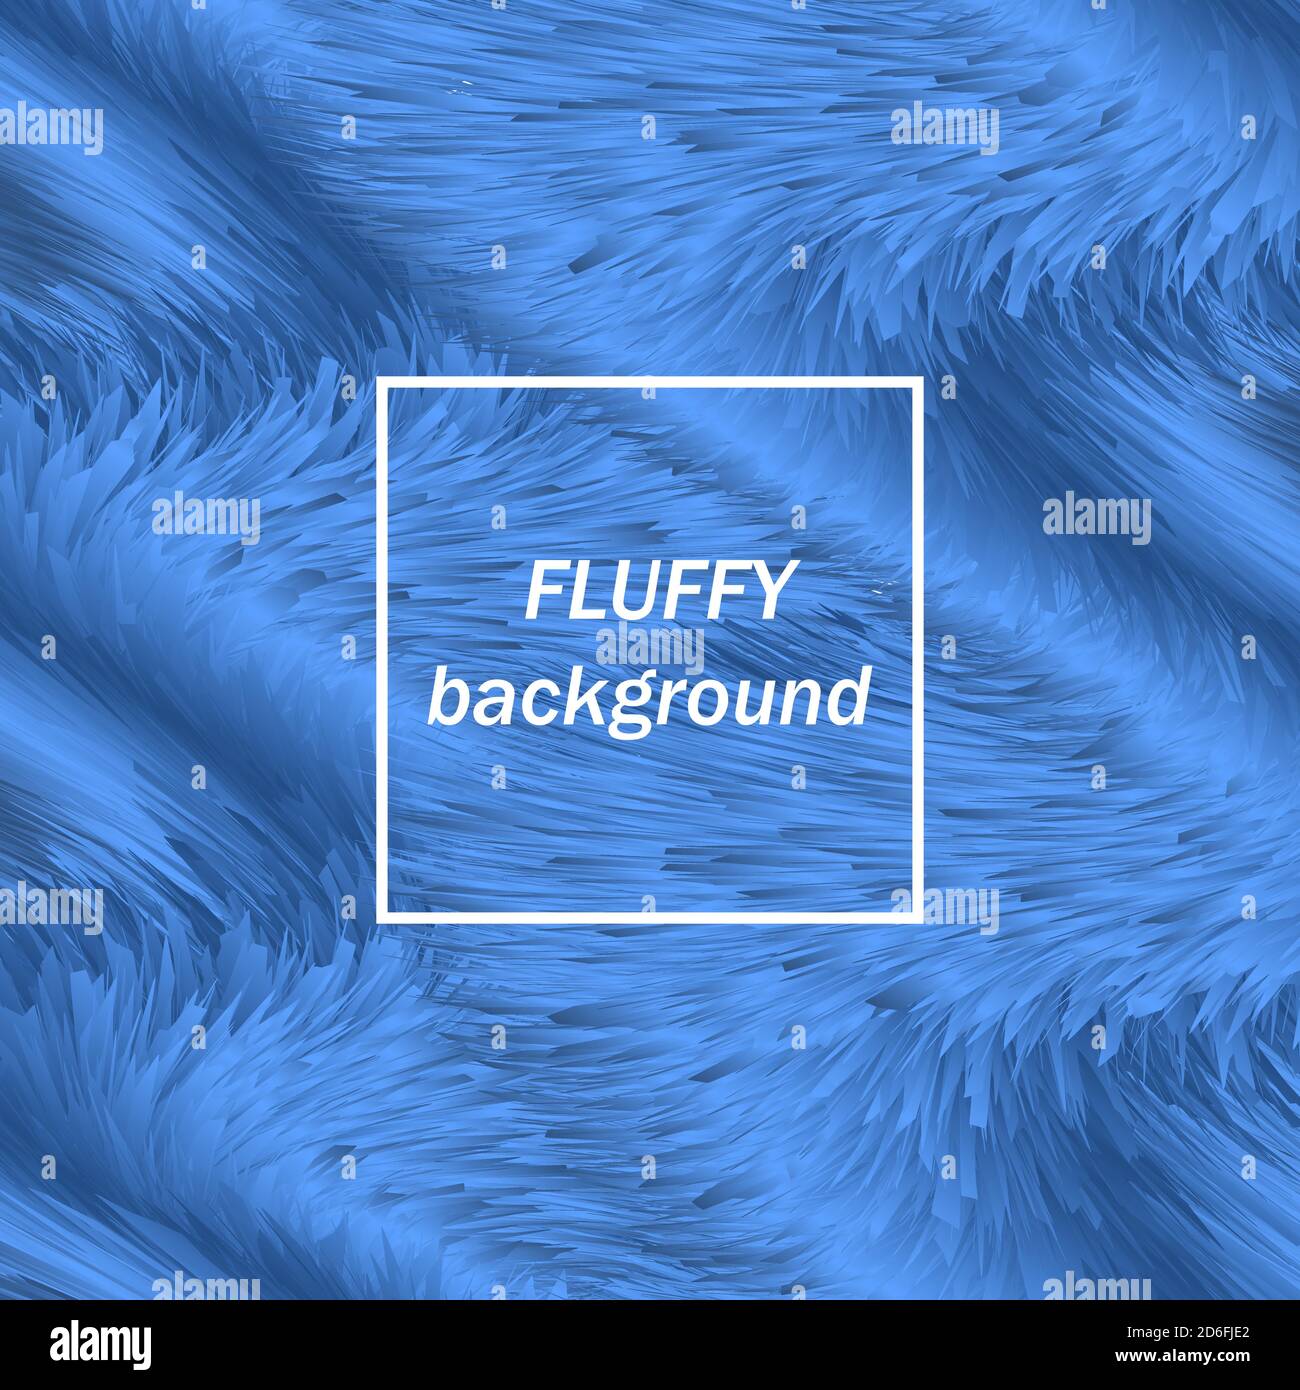 Blue shaggy background. Abstract vector background.Fluffy background Stock Vector